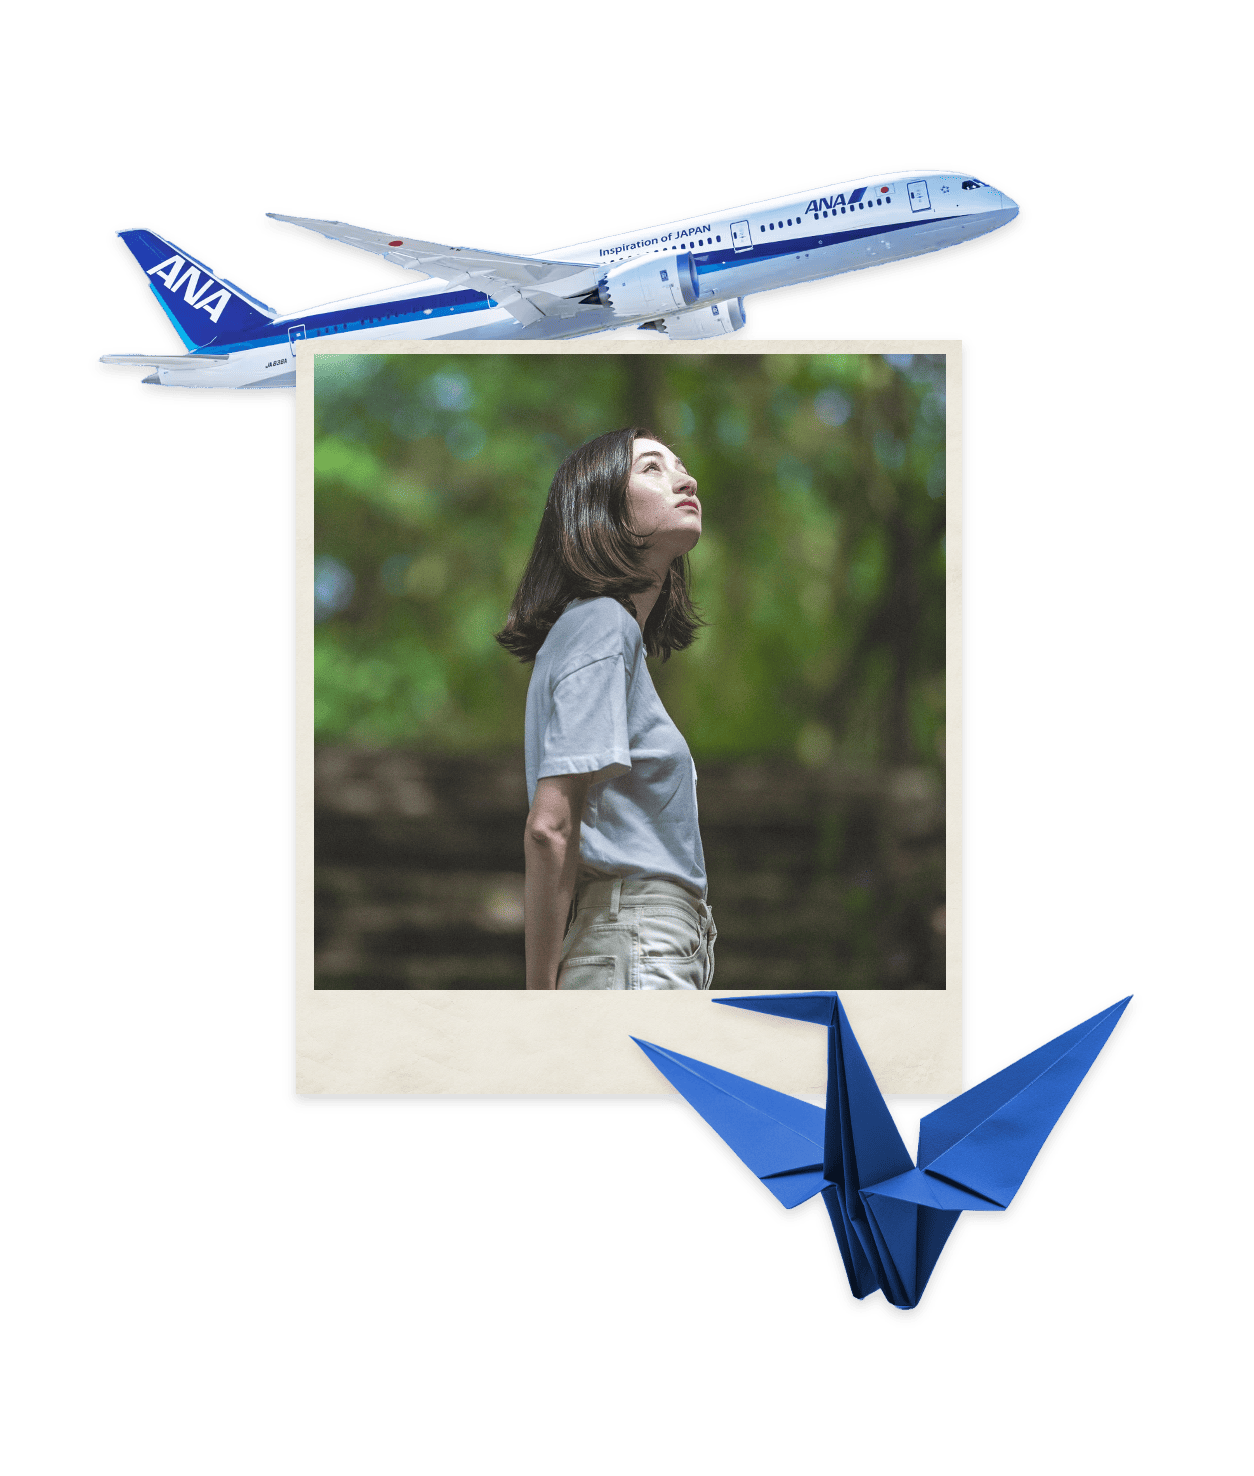 A woman in a white t-shirt gazes up at the sky in a wooded area with a blue origami crane and an ANA airplane in opposite corners.